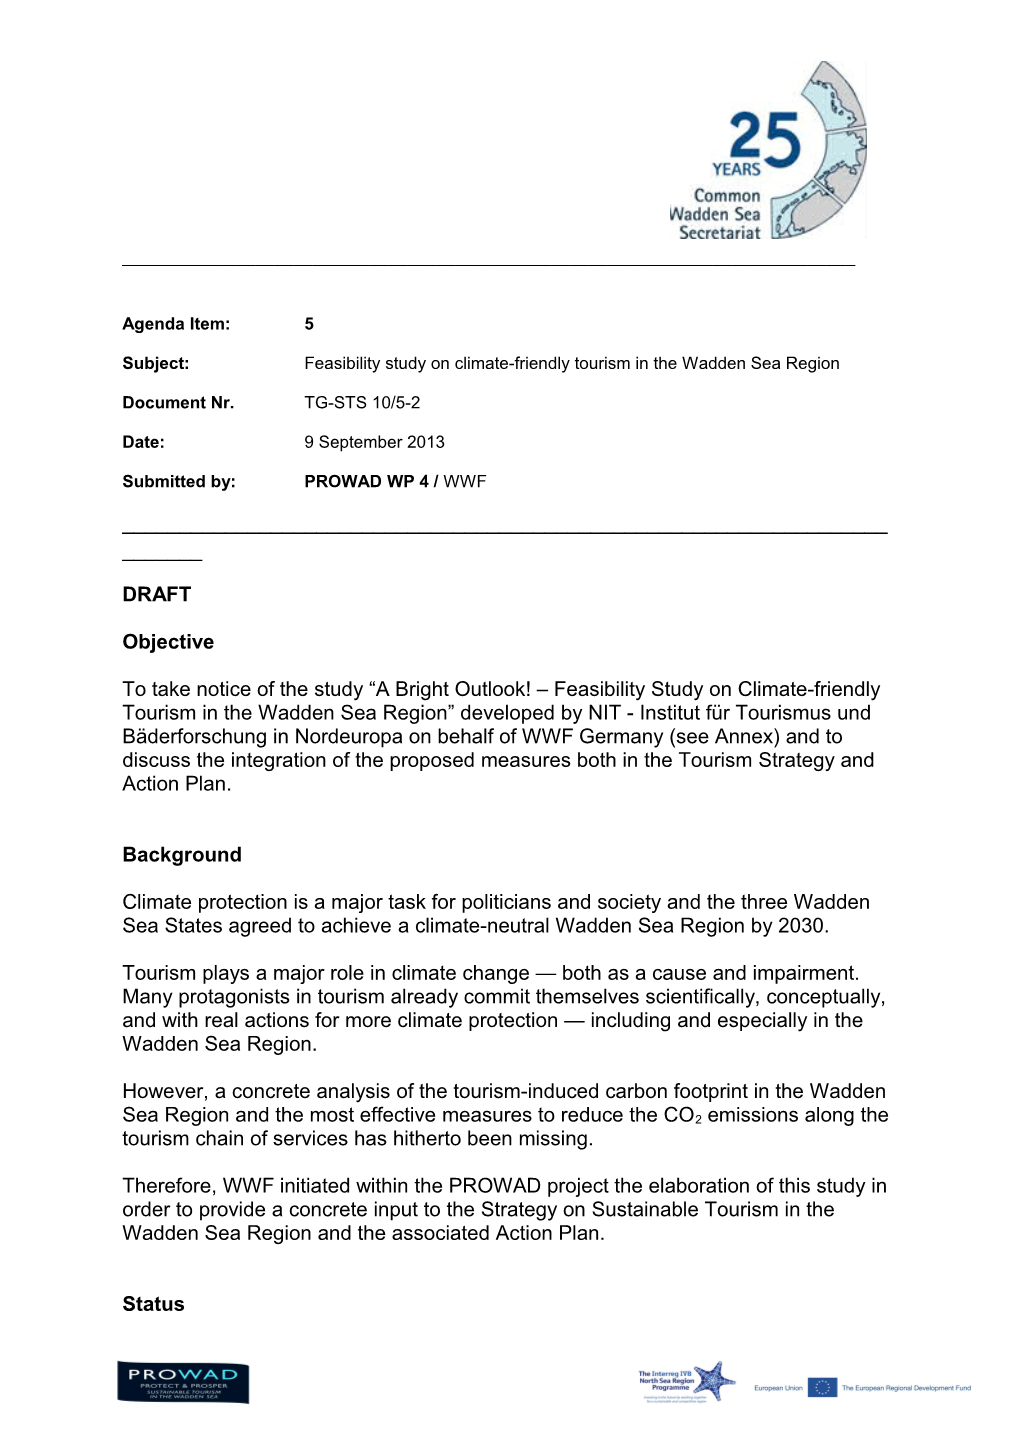 TG-STS-10/5-2 Feasibility Study on Climate-Friendly Tourism (09.09.2013)Page 1